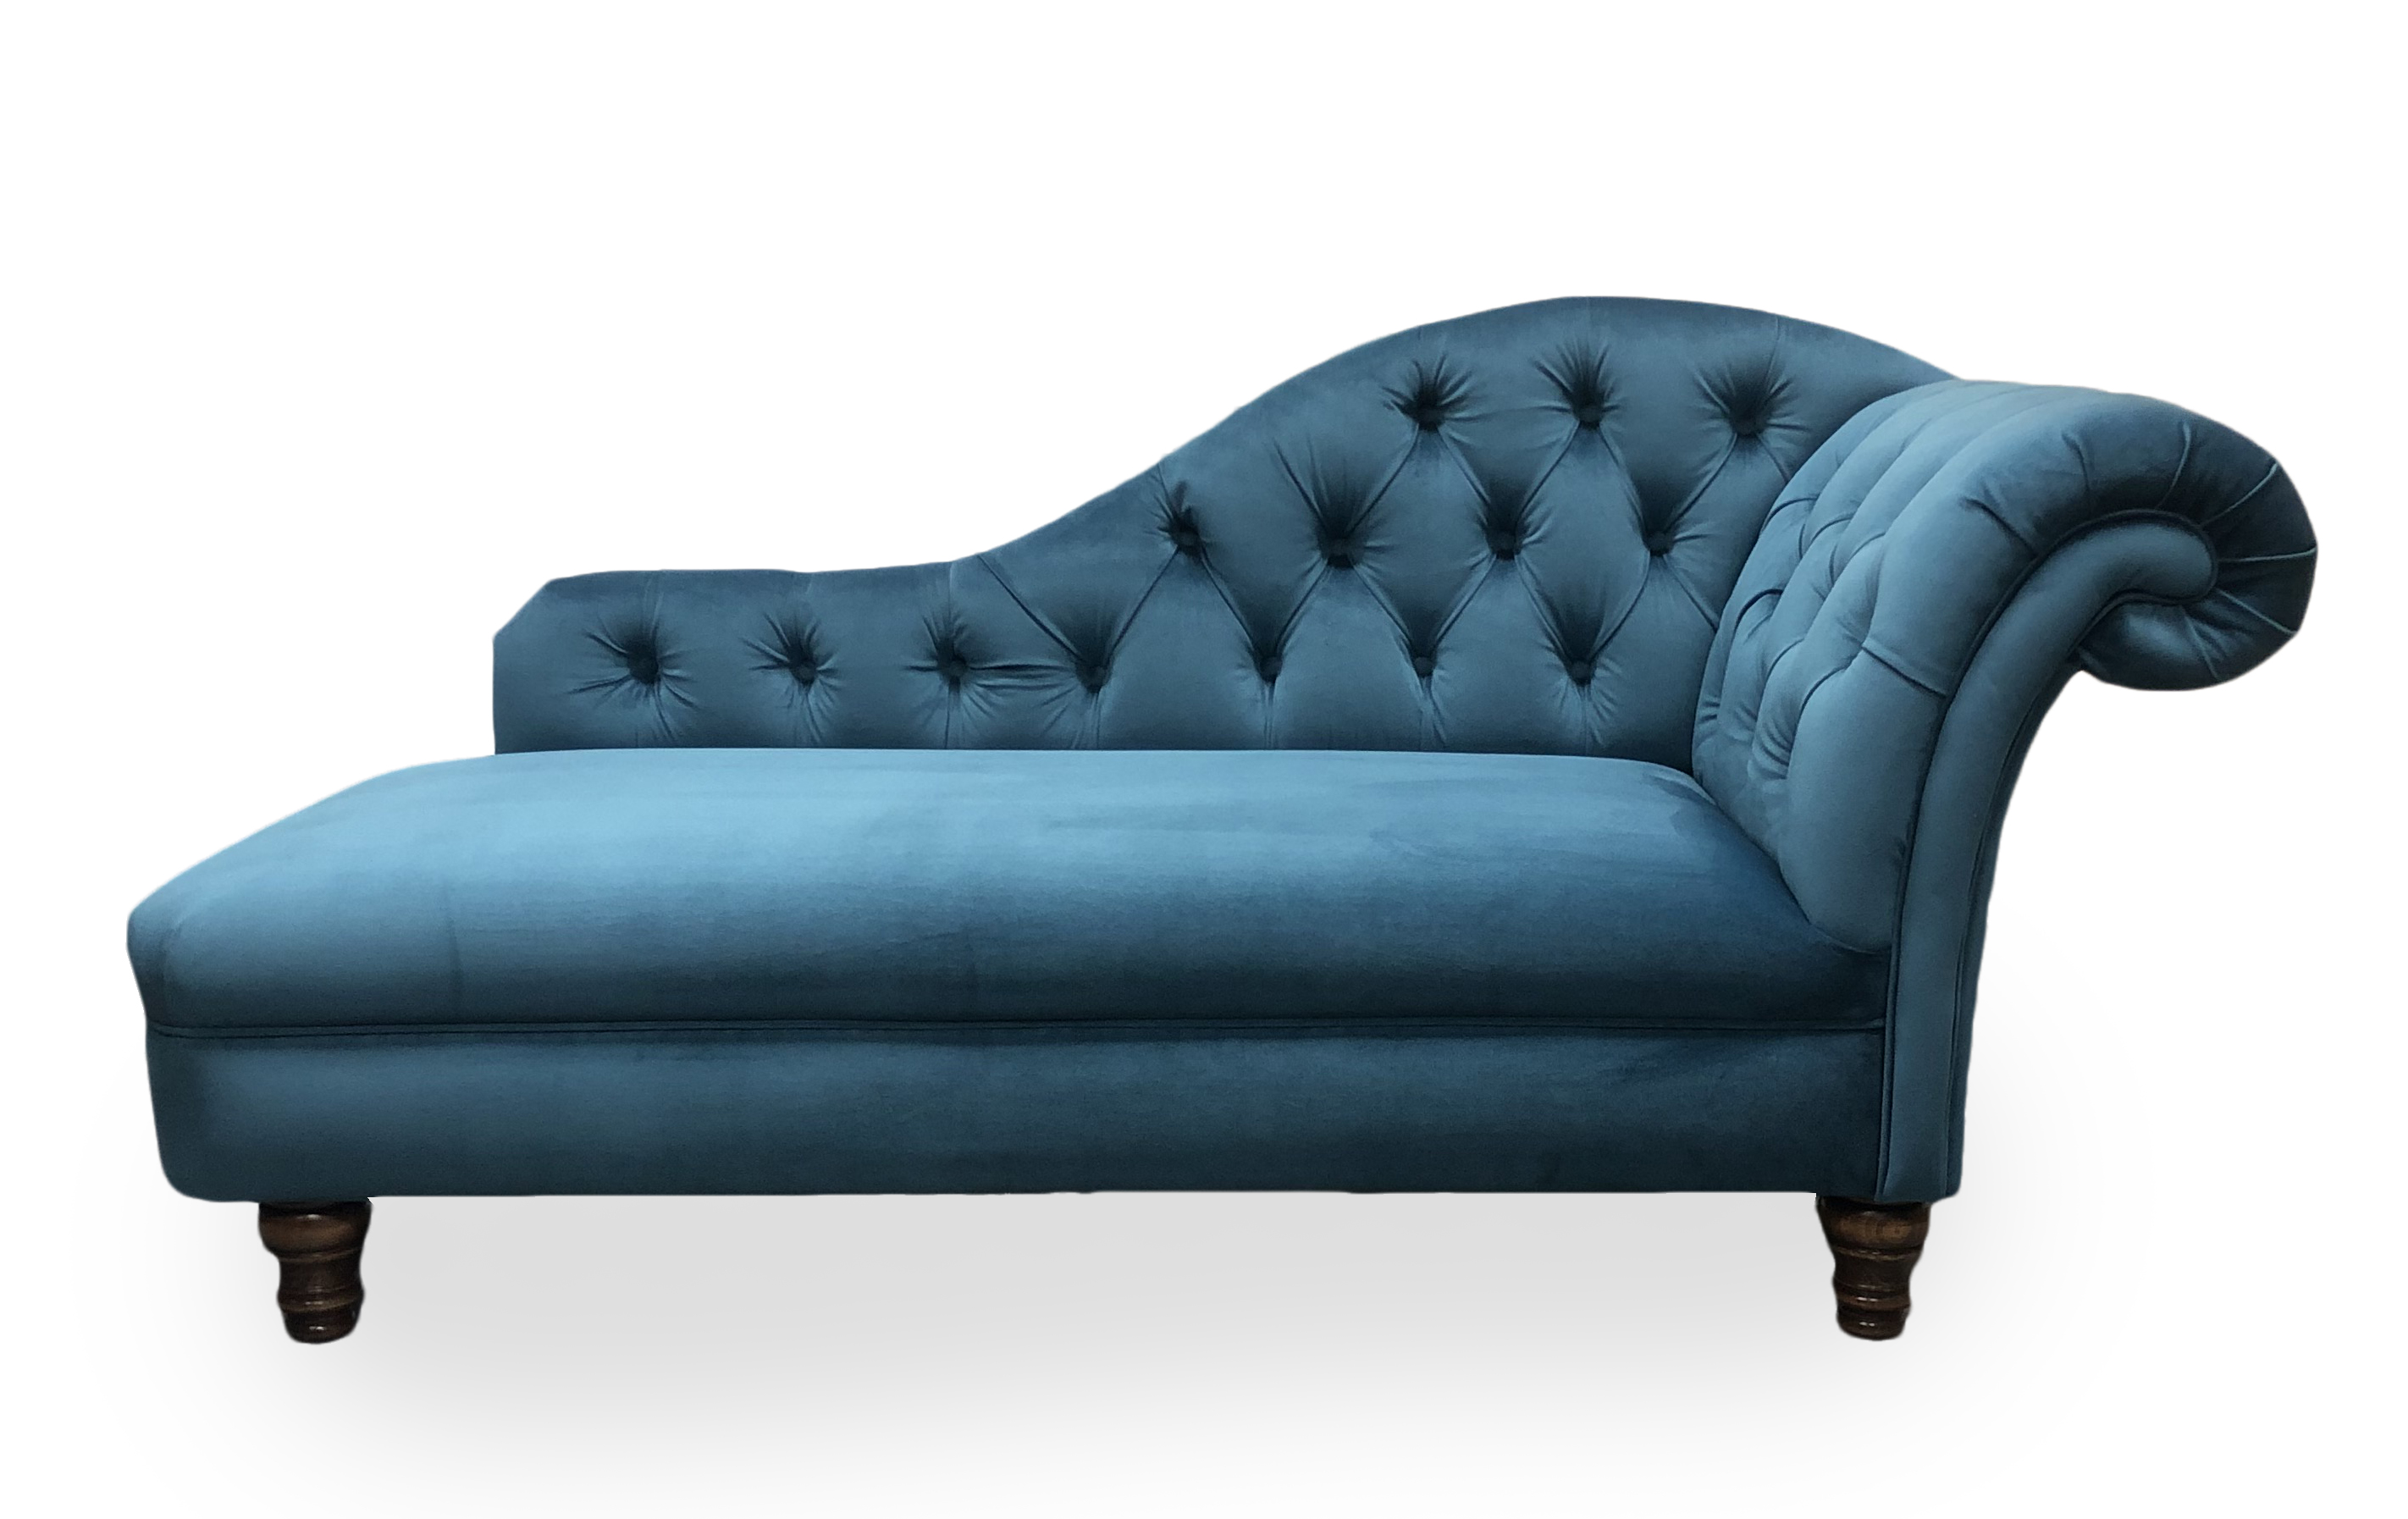 Blue velvet chaise longue with buttoned back and arm.